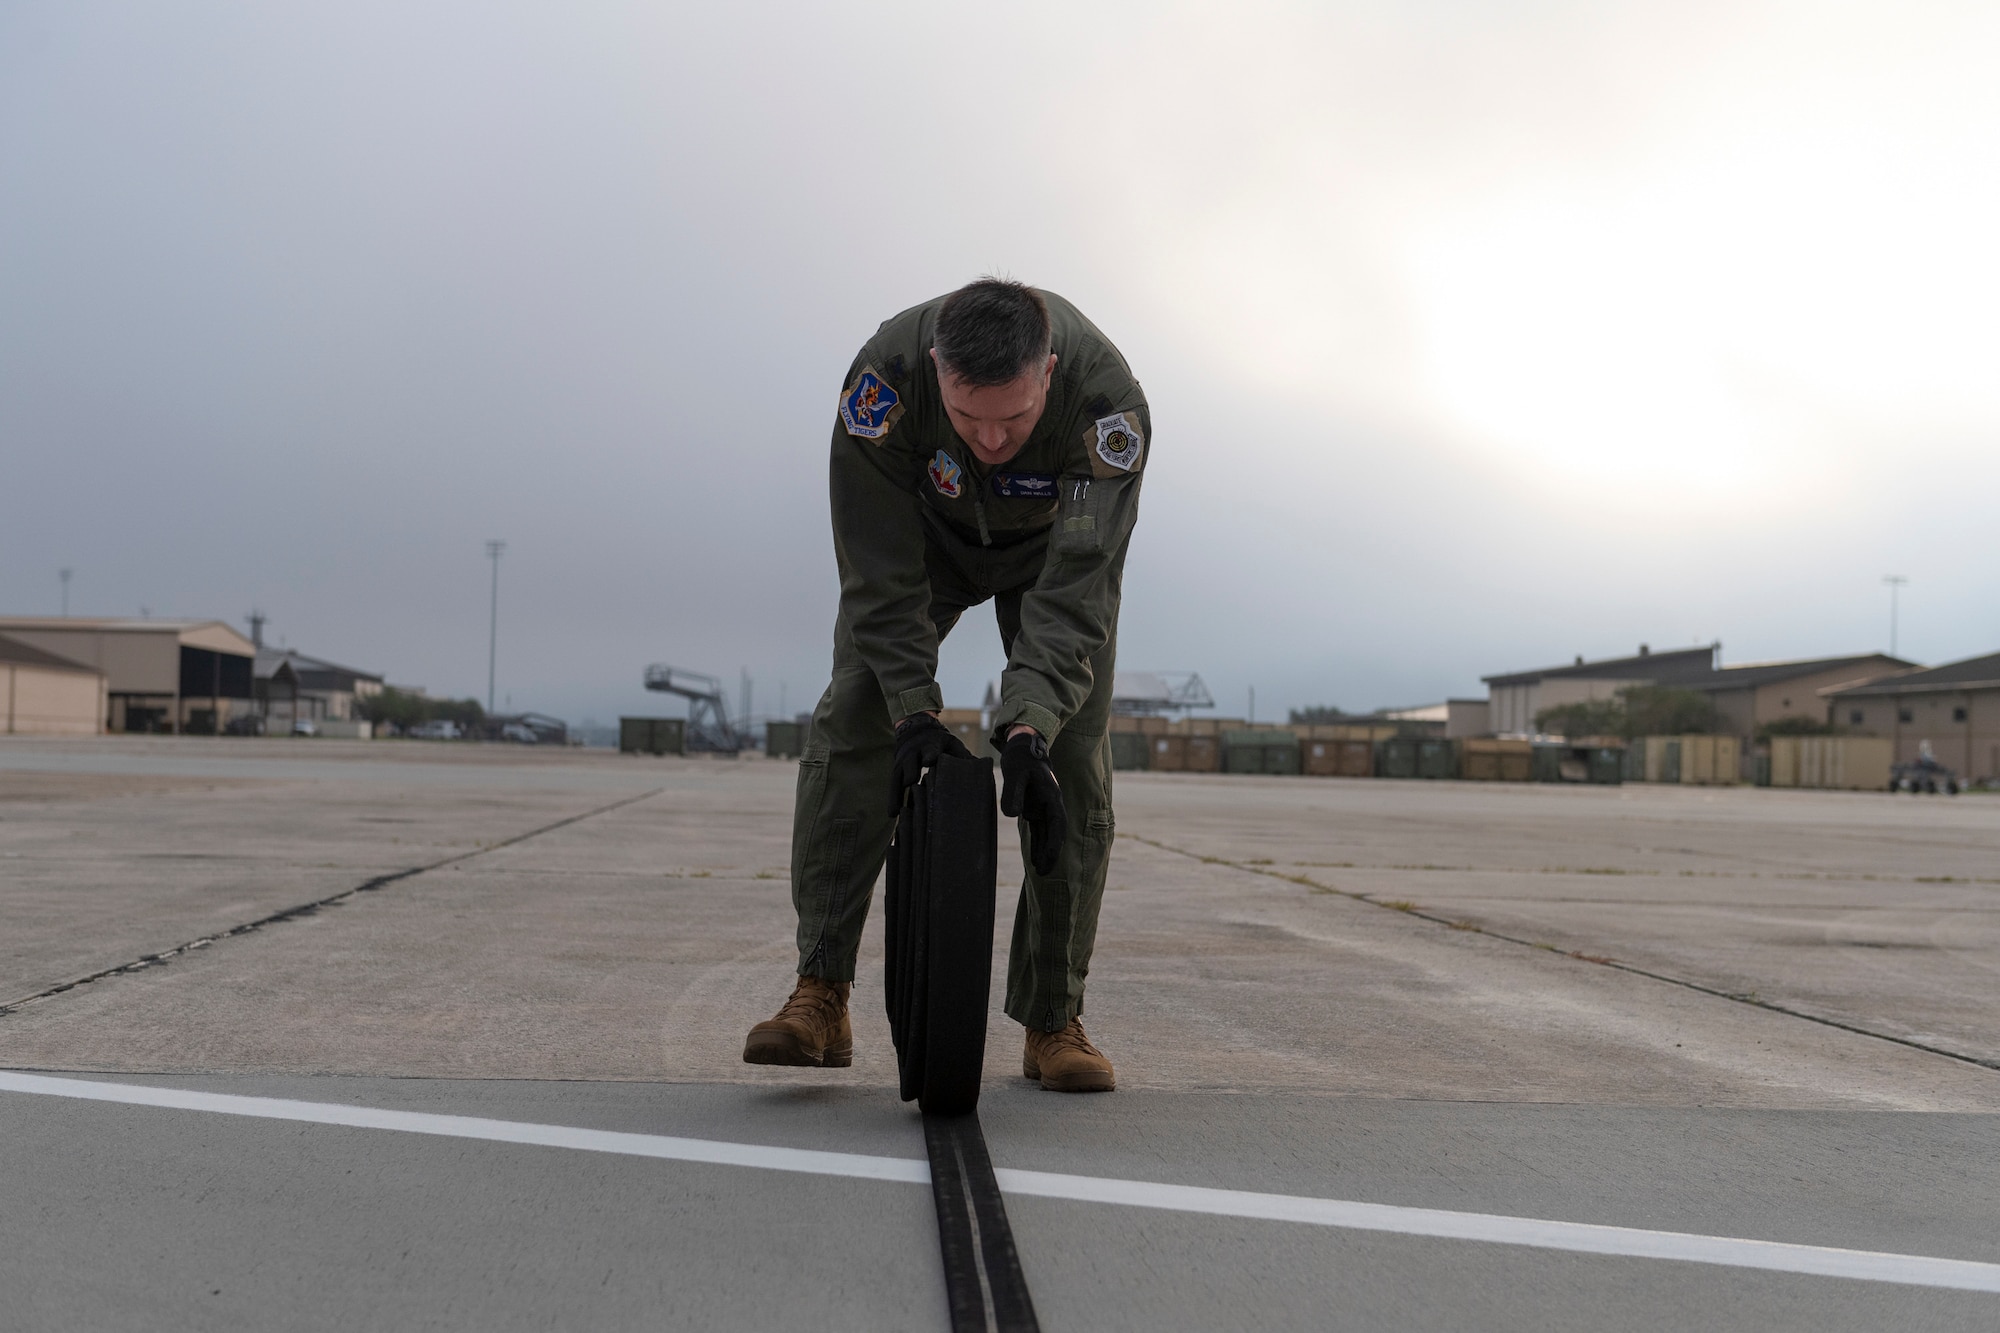 A photo of an airman rolling up a fuel hose.